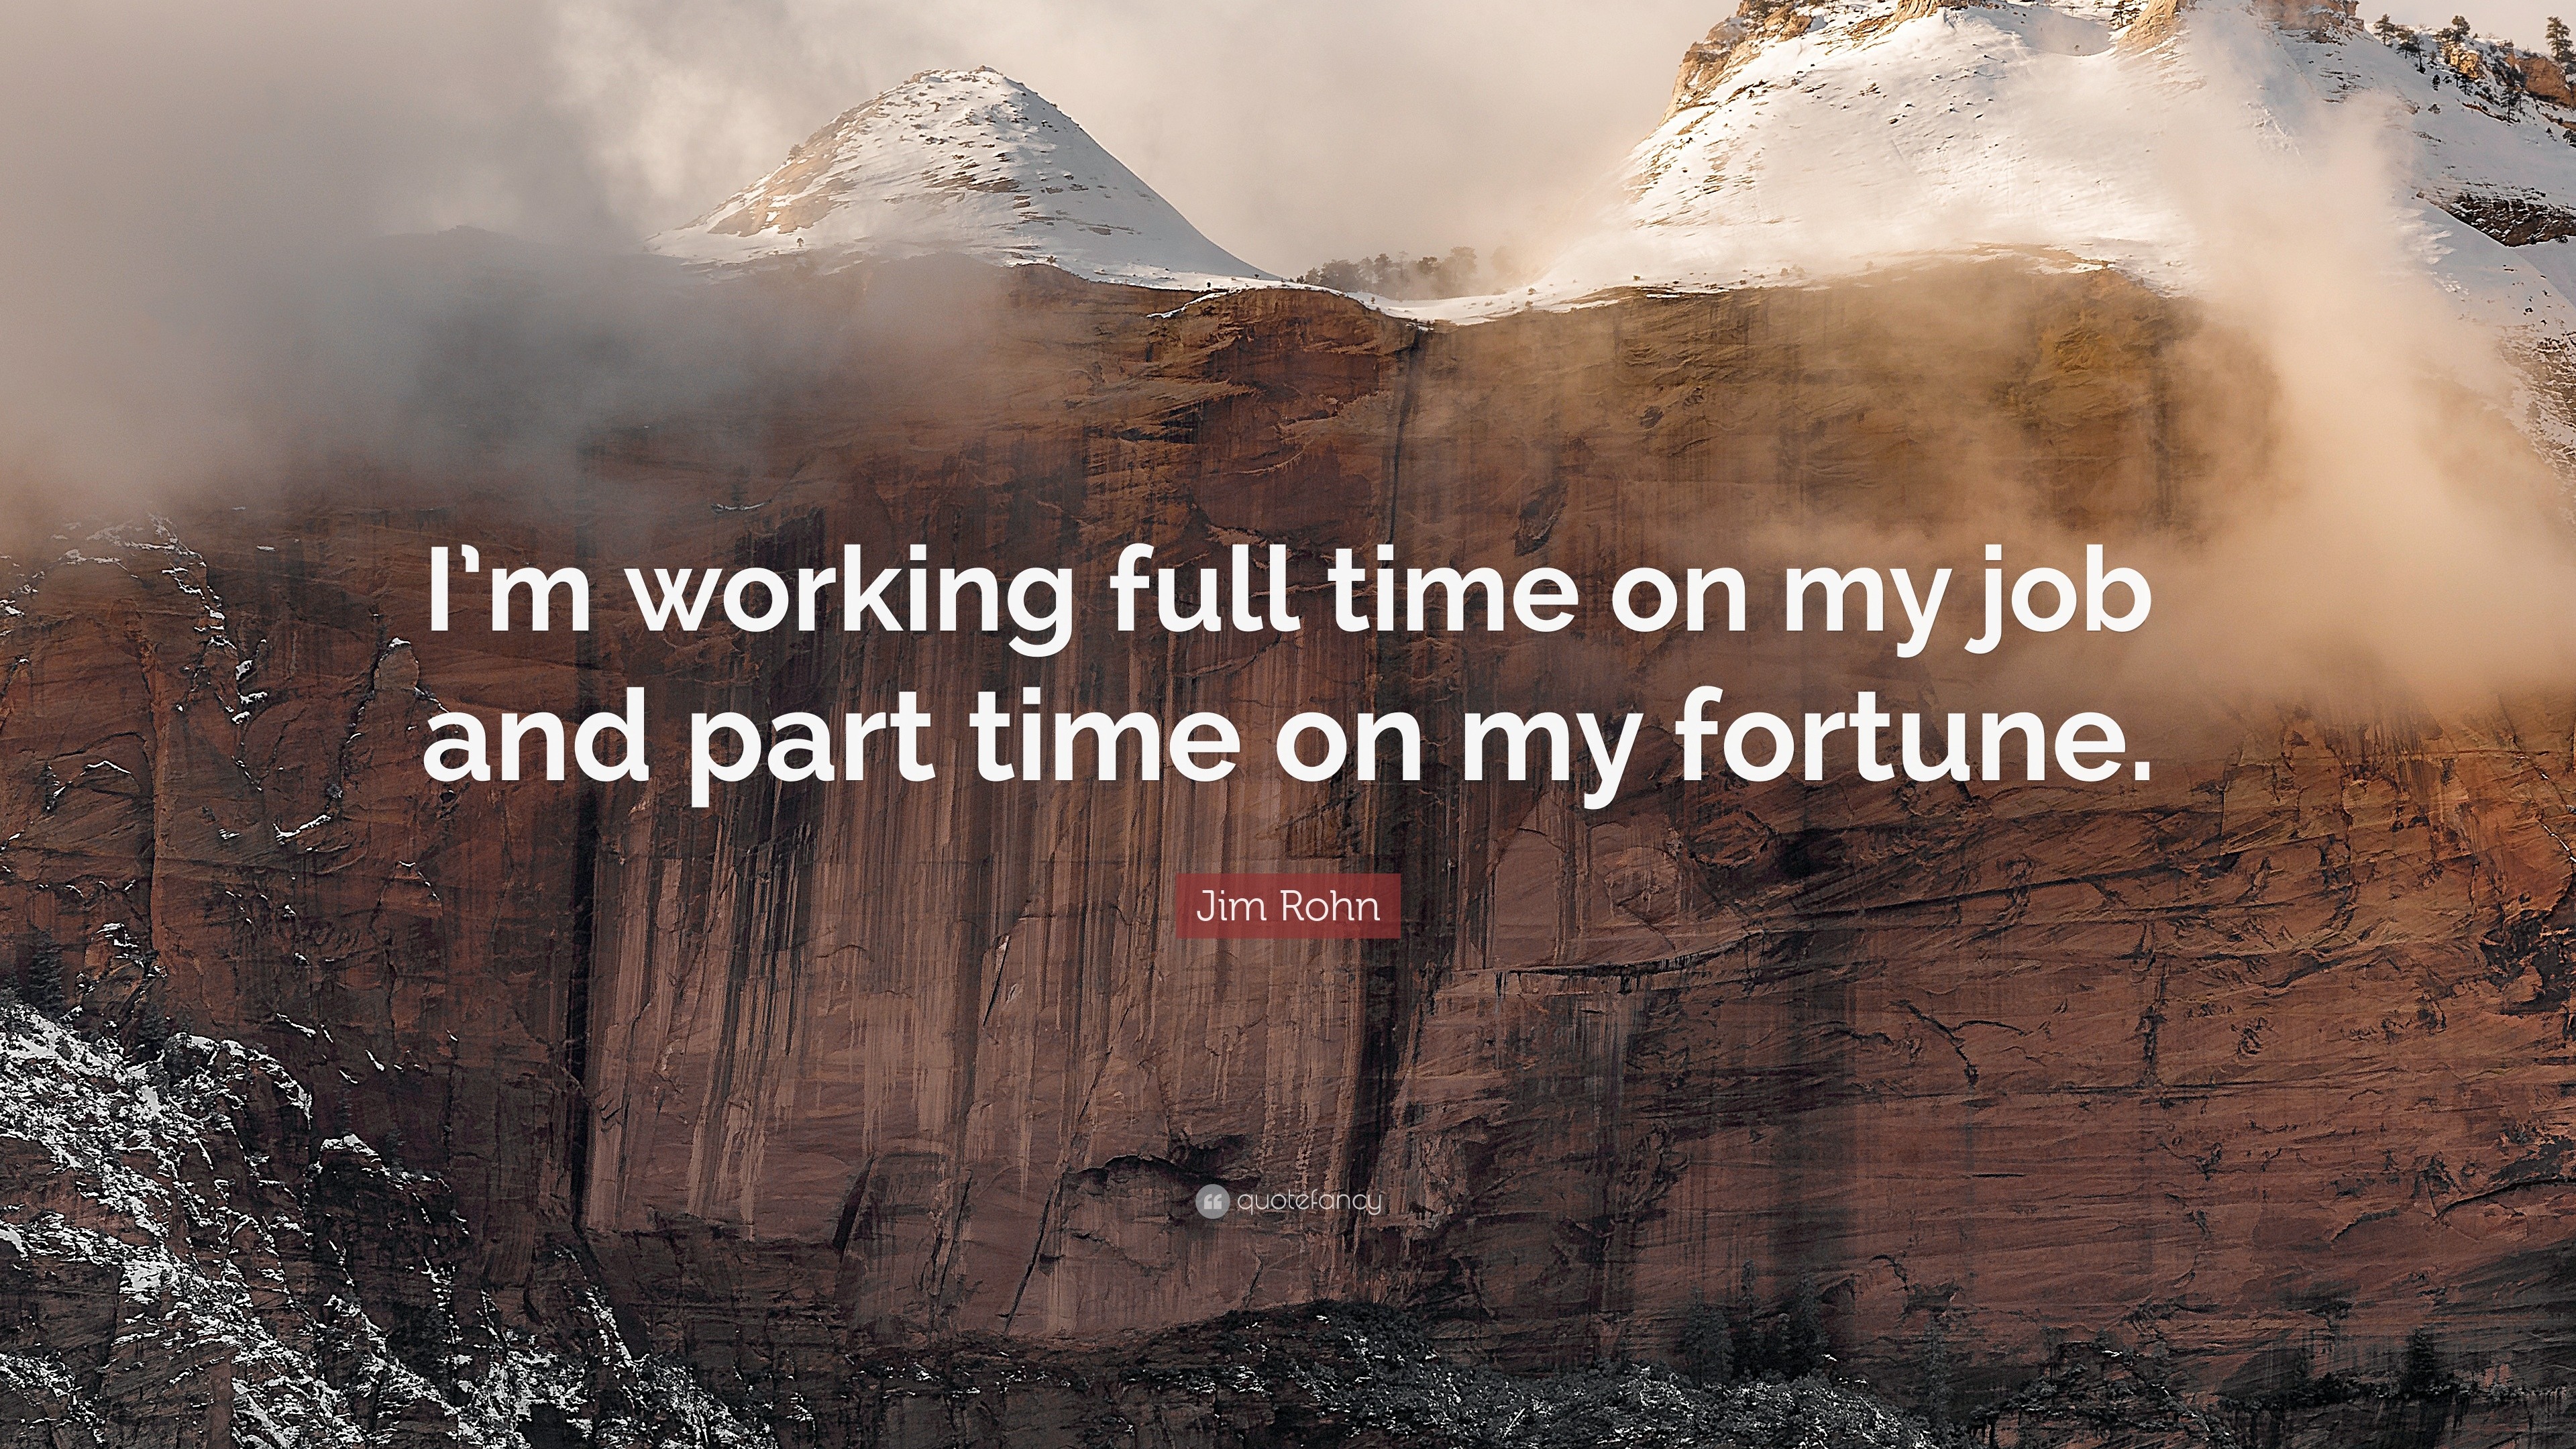 Jim Rohn Quote “I’m working full time on my job and part